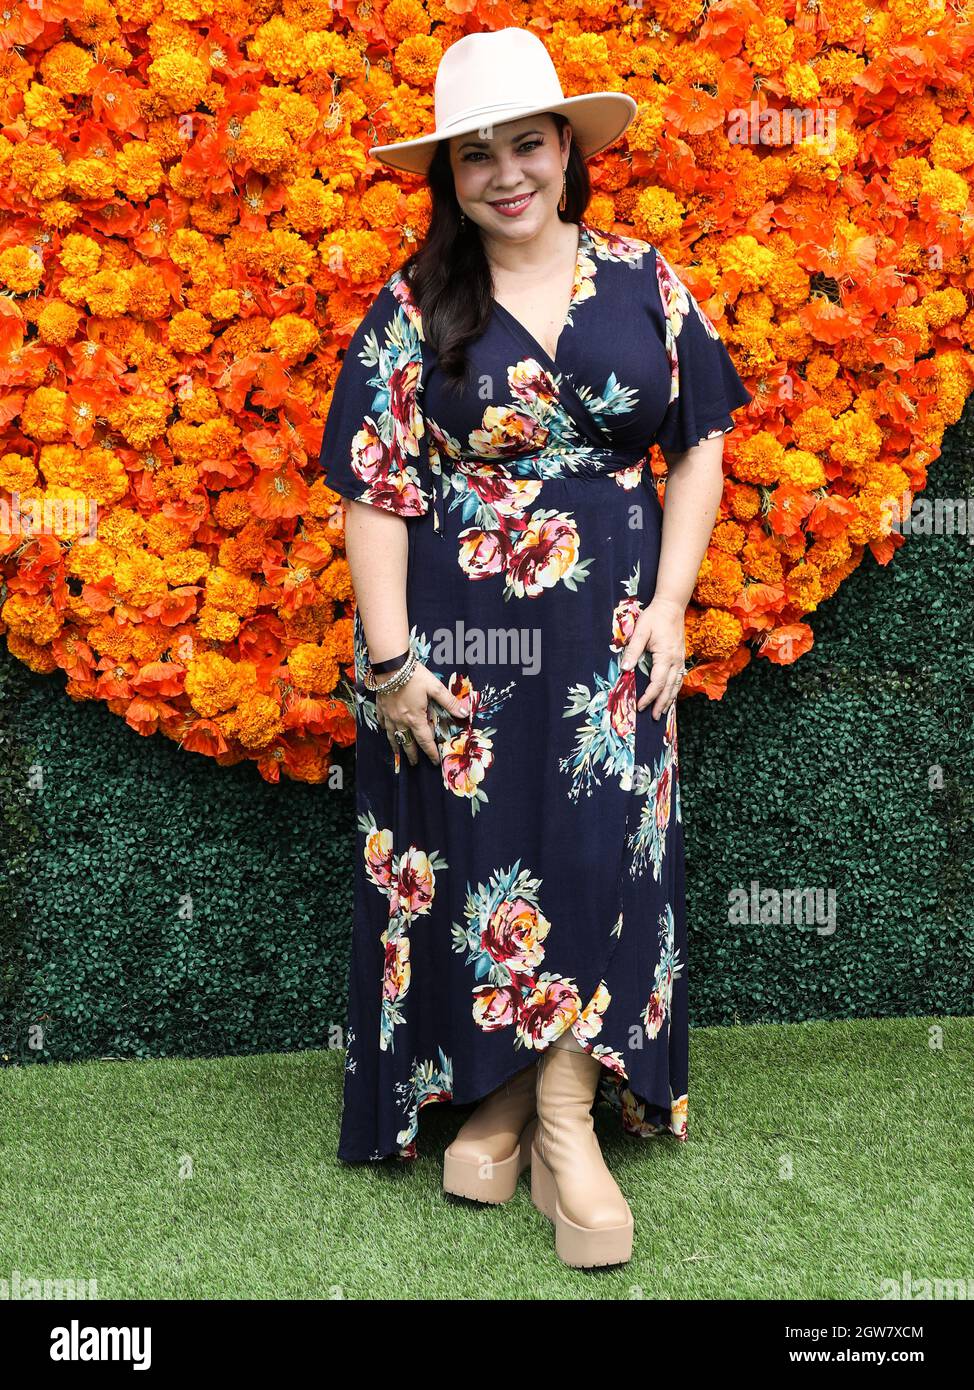 PACIFIC PALISADES, LOS ANGELES, CALIFORNIA, USA - OCTOBER 02: Gloria Calderon Kellett arrives at the Veuve Clicquot Polo Classic Los Angeles 2021 held at the Will Rogers State Historic Park on October 2, 2021 in Pacific Palisades, Los Angeles, California, United States. (Photo by Xavier Collin/Image Press Agency/Sipa USA) Stock Photo